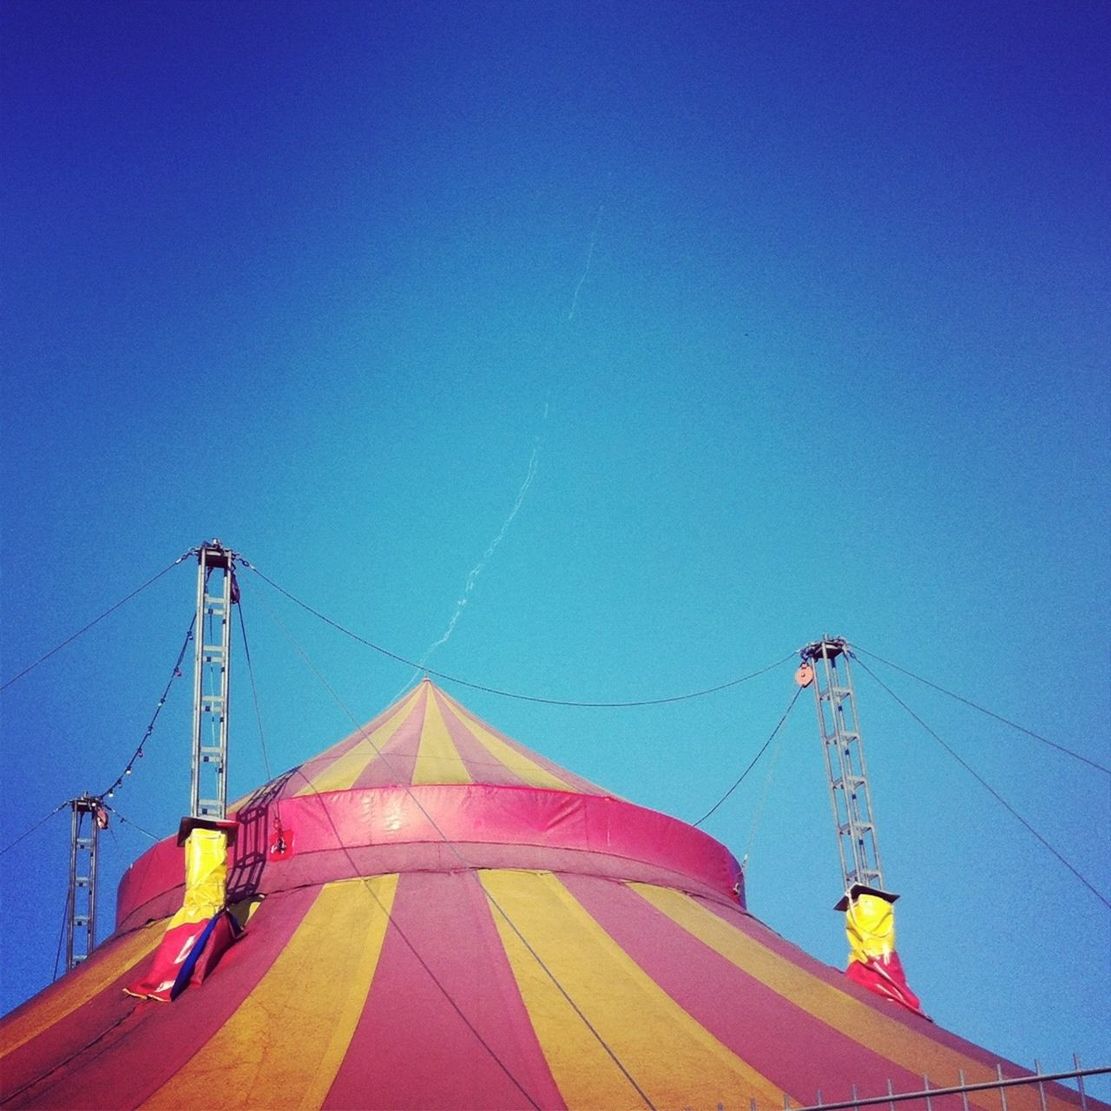 High section of tent against clear blue sky